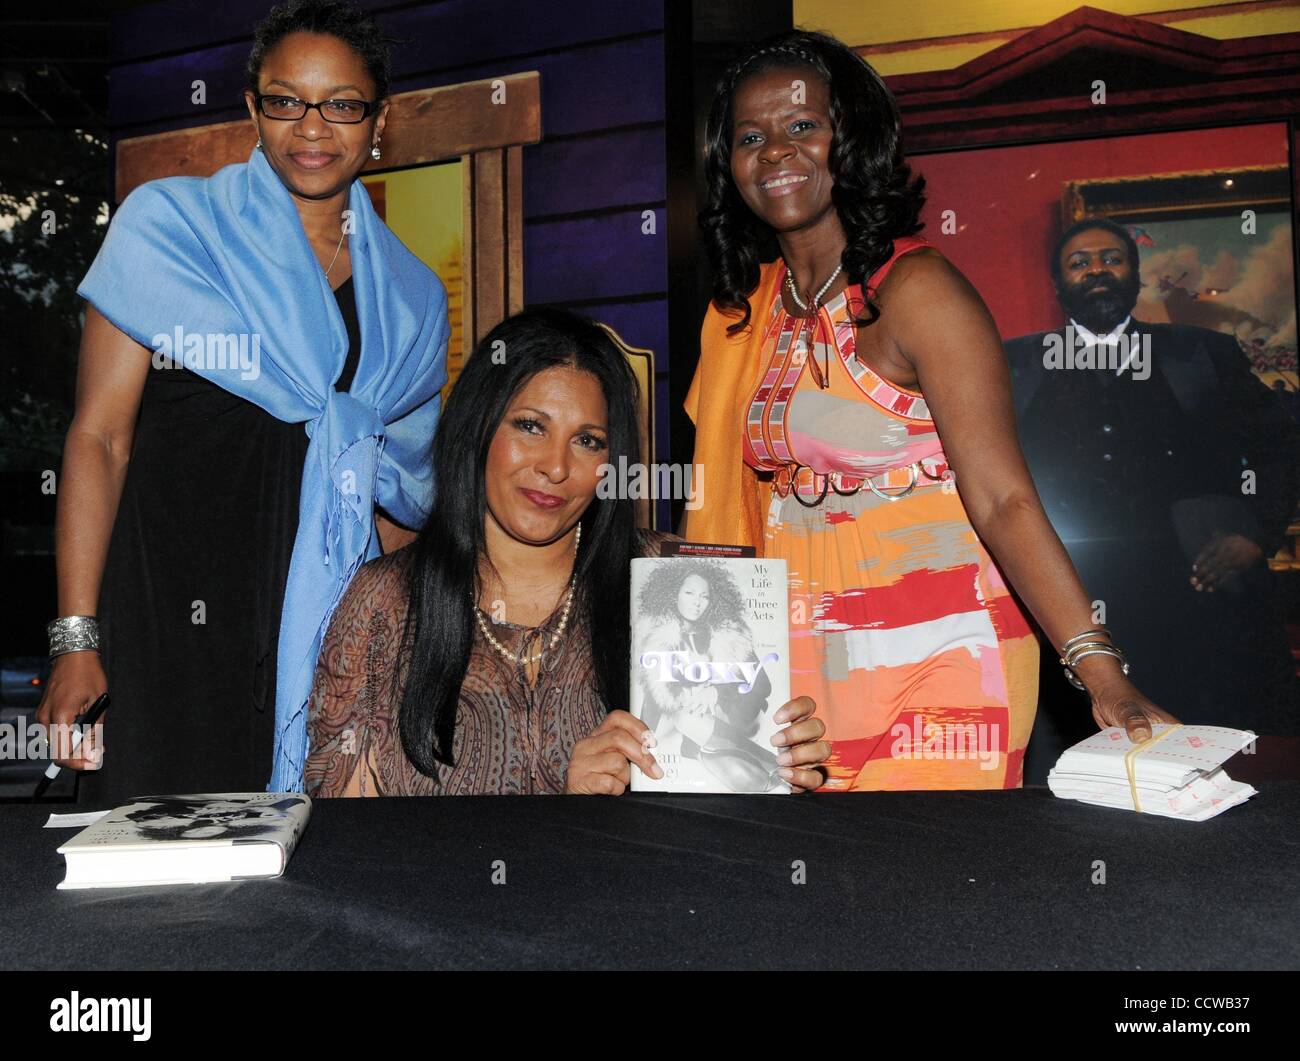 May 06, 2010 - Philadelphia, Pennsylvania, U.S. - Publicists LINDA DUGGINS & VANESSE SAGMBOTI with actress PAM GRIER known for her roles as 'Foxy Brown' and 'Jackie Brown' arrives at the African American Museum for a book signing of her new memoir, 'Foxy: My Life in Three Acts'. (Credit Image: Â© Ri Stock Photo